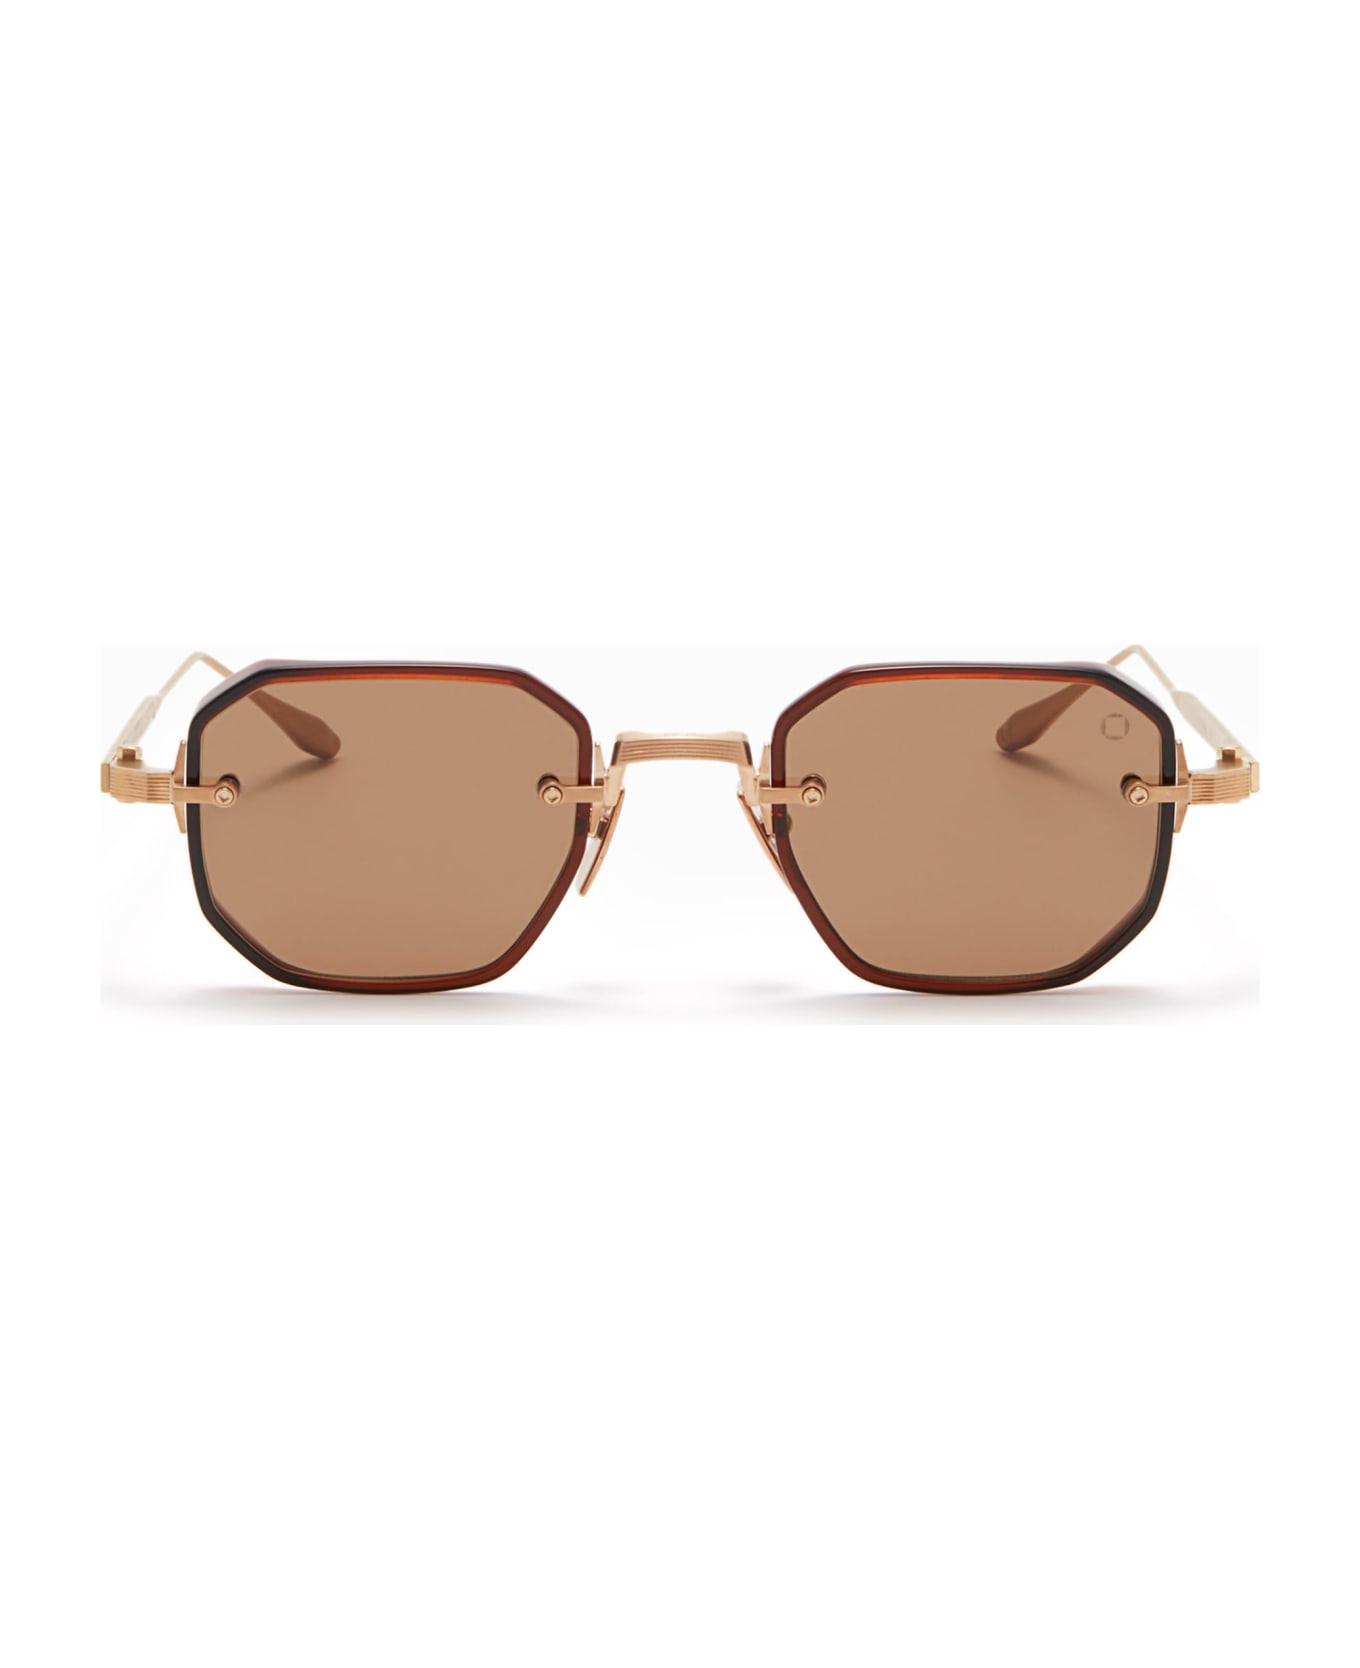 Akoni Juno-two - Brushed Gold / Brown Crystal Sunglasses - Gold